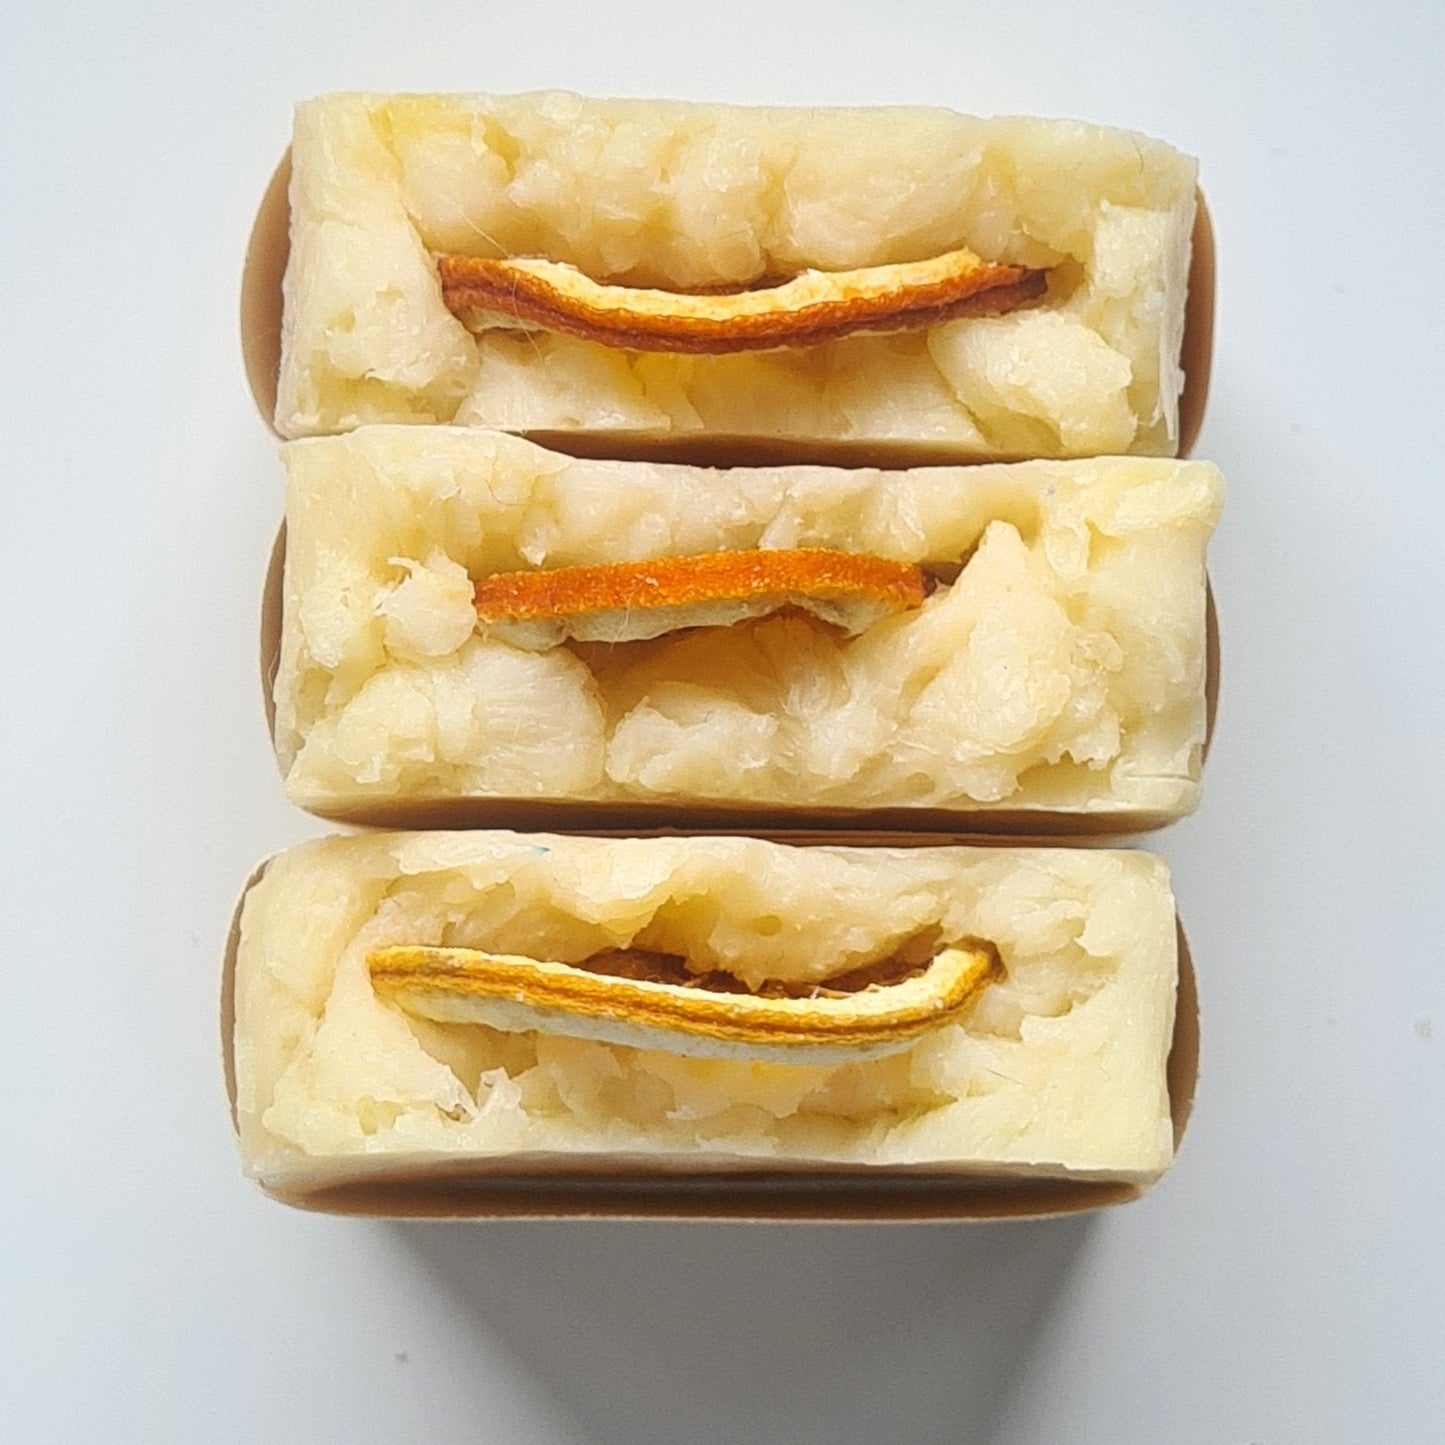 Soap - Orange and Patchouli - Dees Shed